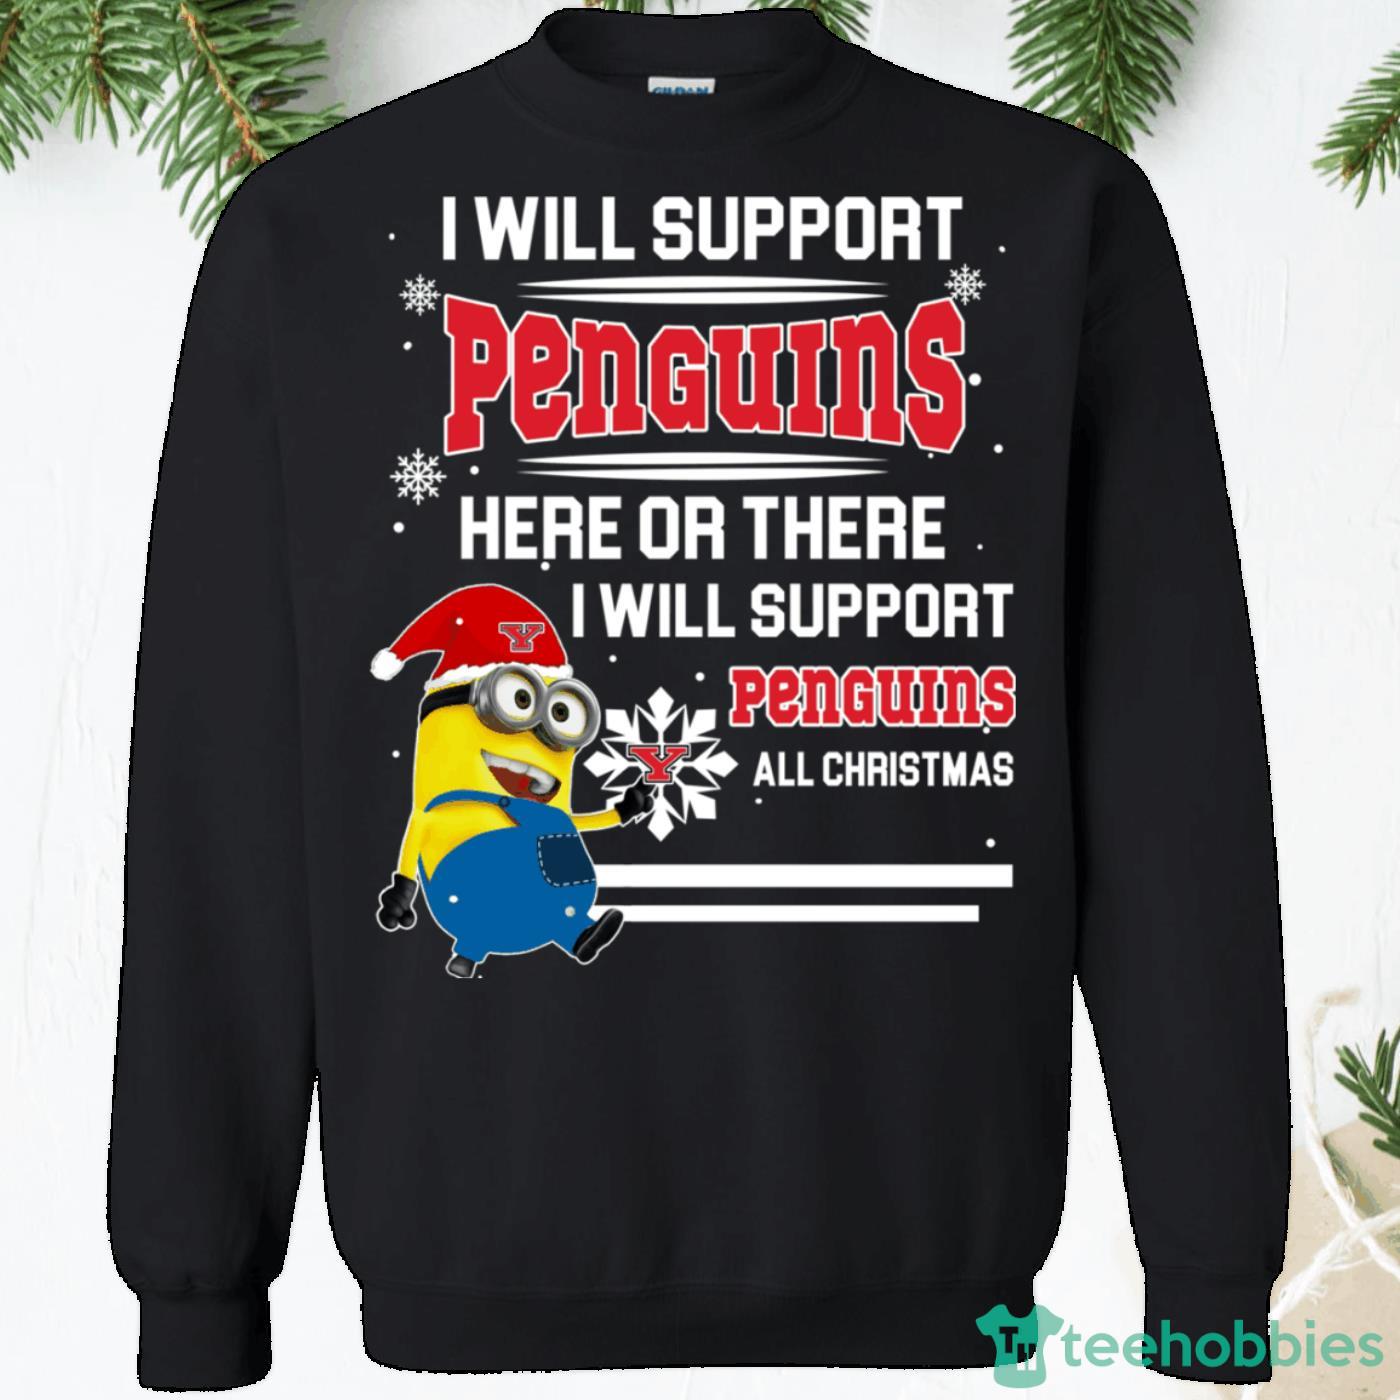 Youngstown State Penguins Minion Christmas Sweatshirt - youngstown-state-penguins-minion-christmas-sweatshirt-1